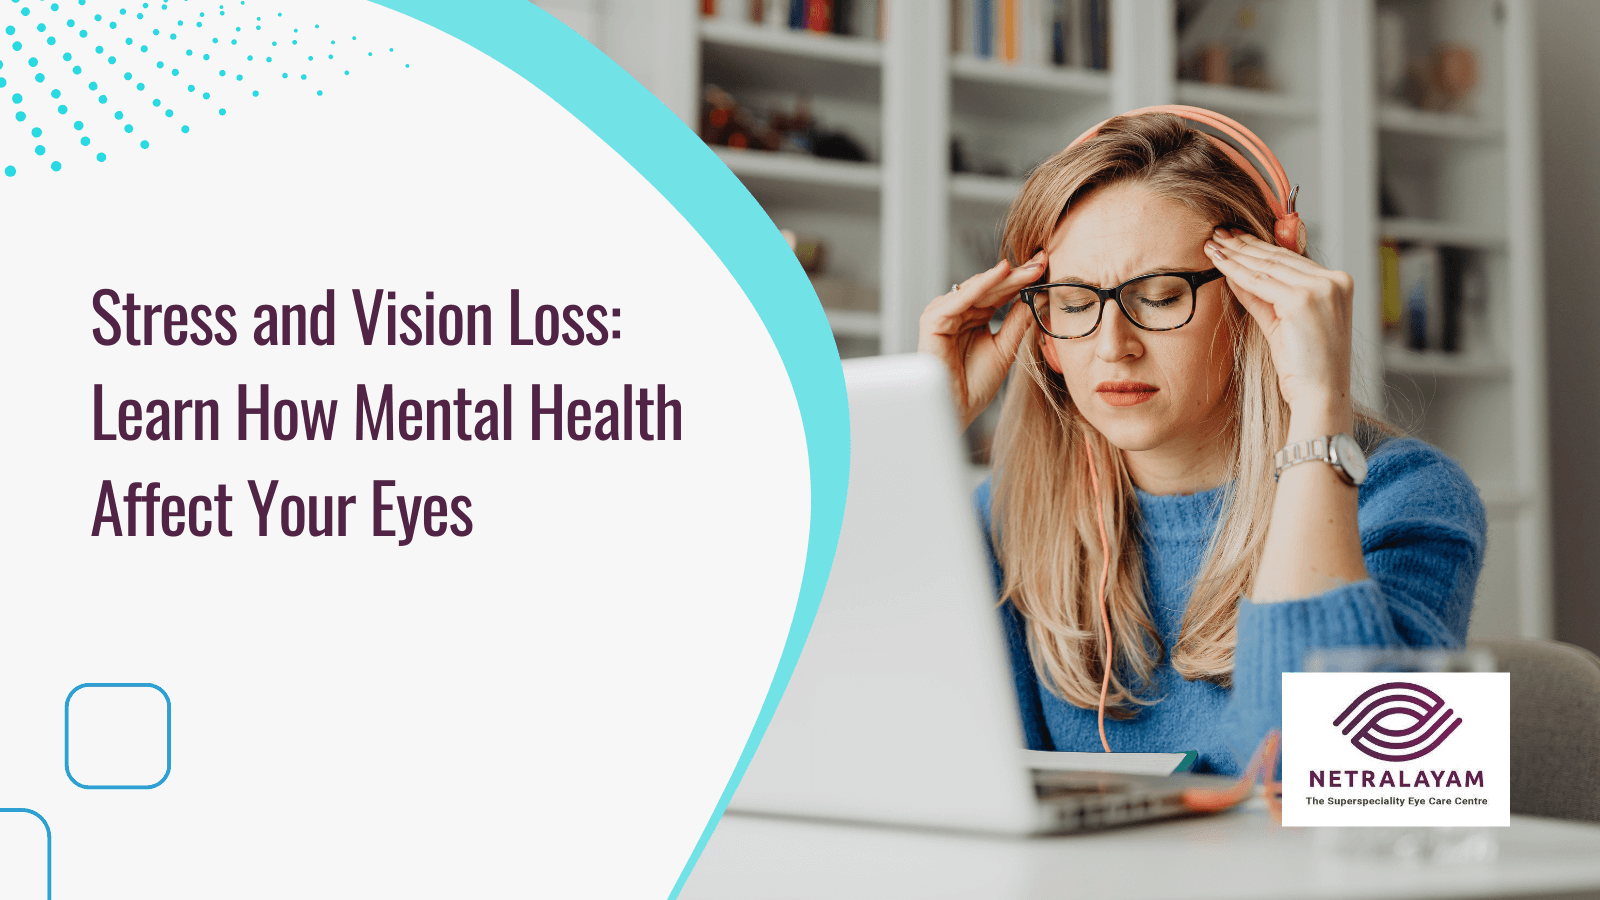 Stress and Vision Loss: Learn How Mental Health Affect Your Eyes